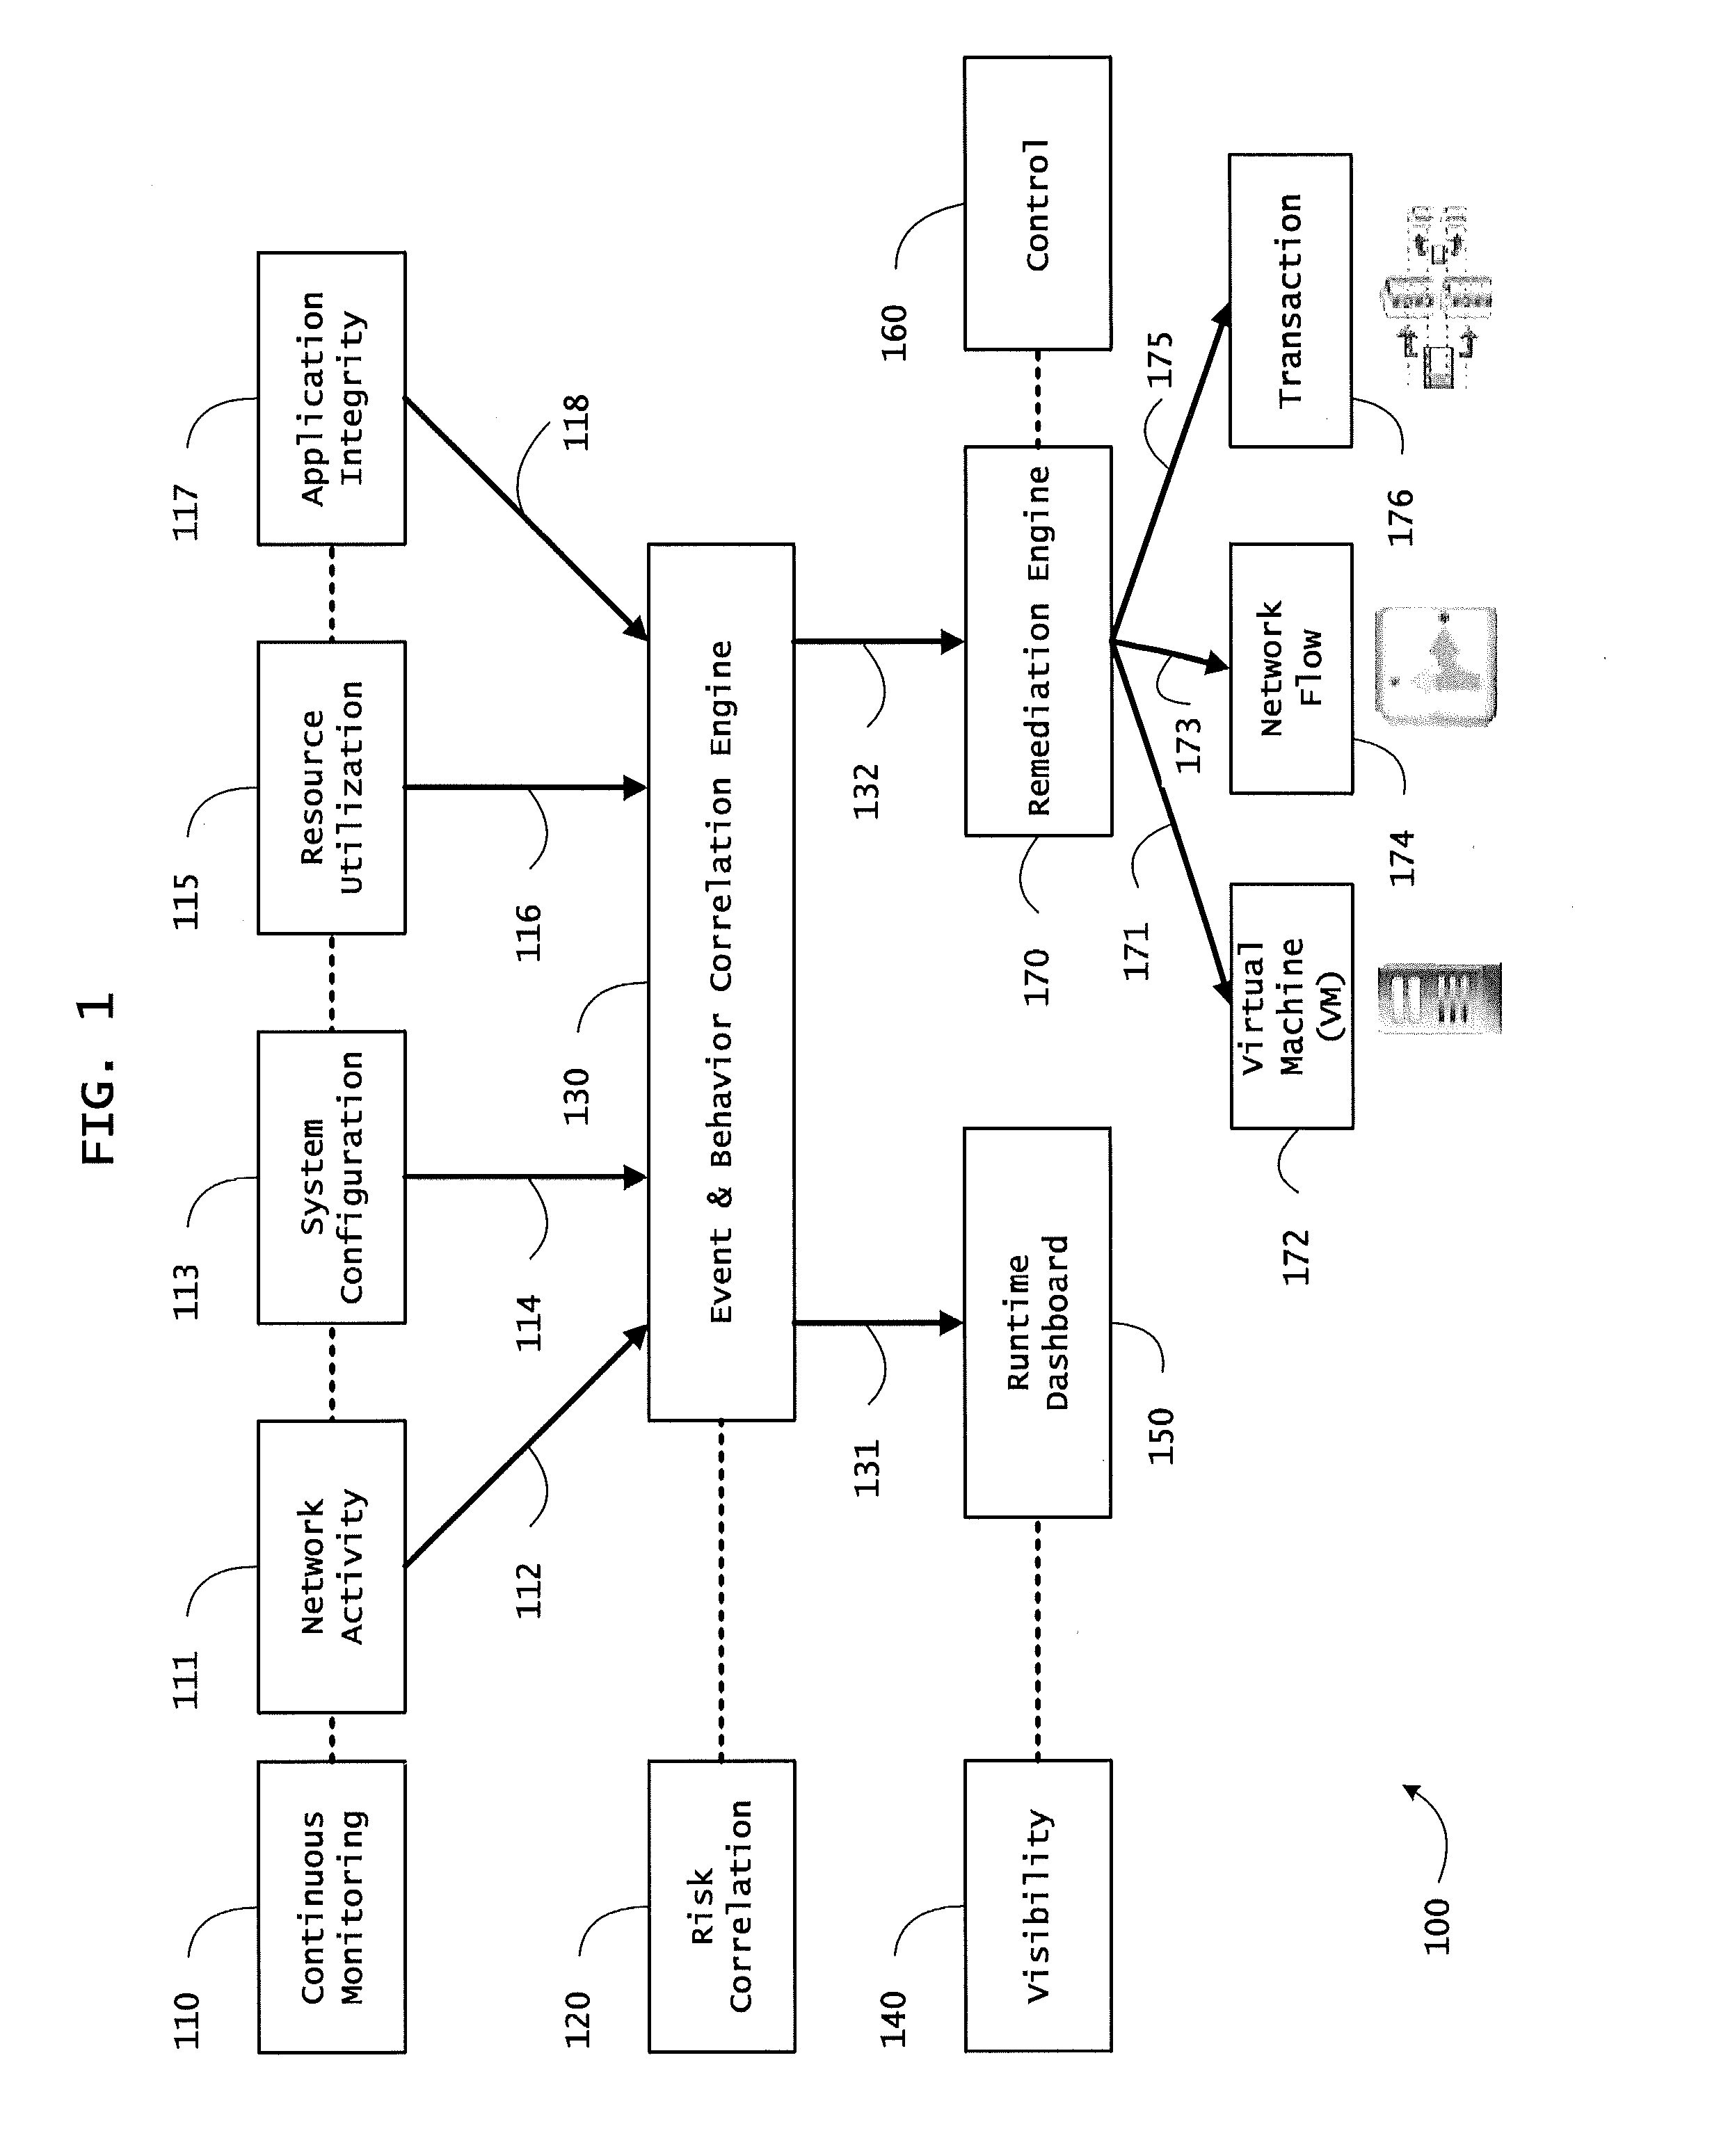 Systems and methods for network flow remediation based on risk correlation